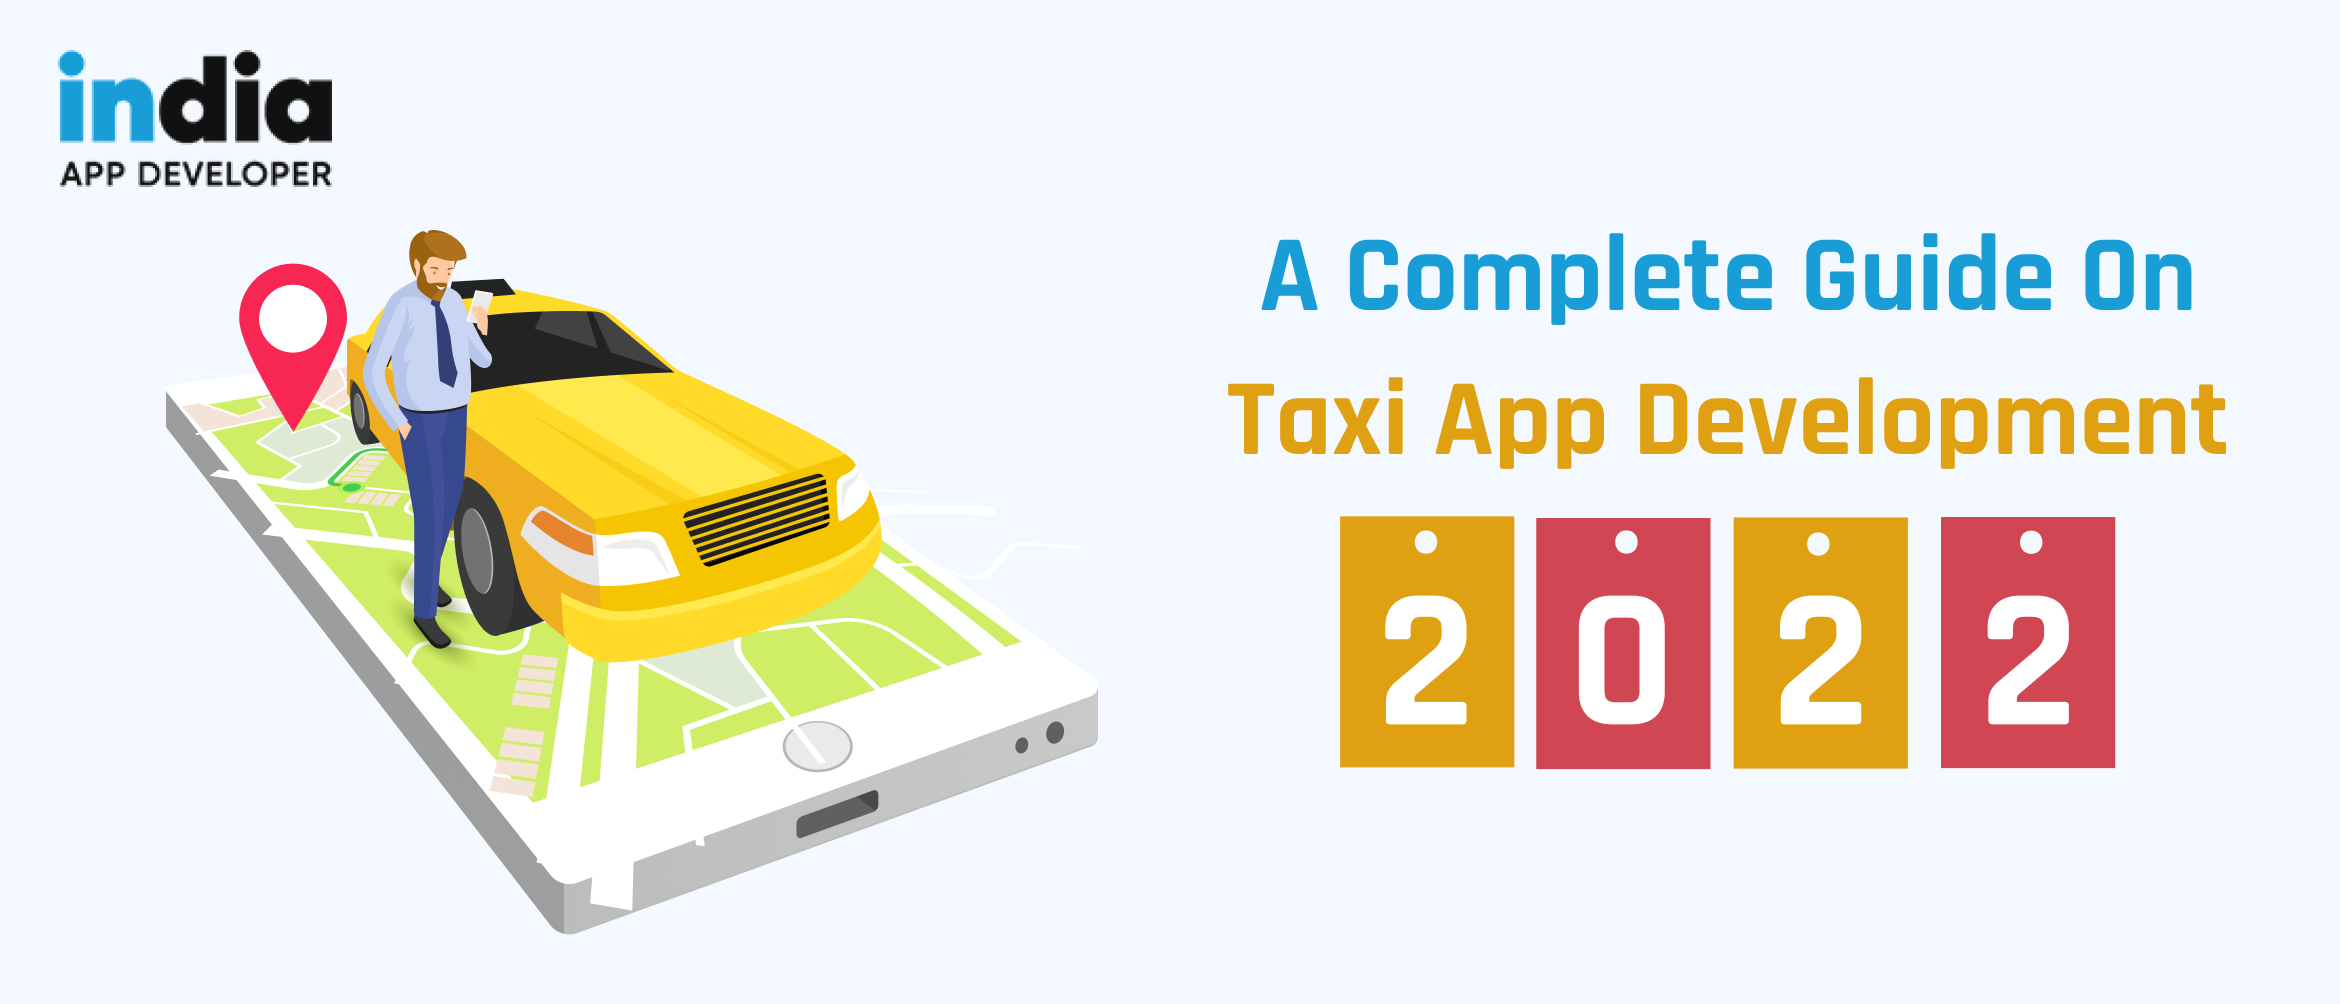 A complete guide on Taxi App development 2022 - India App Developer